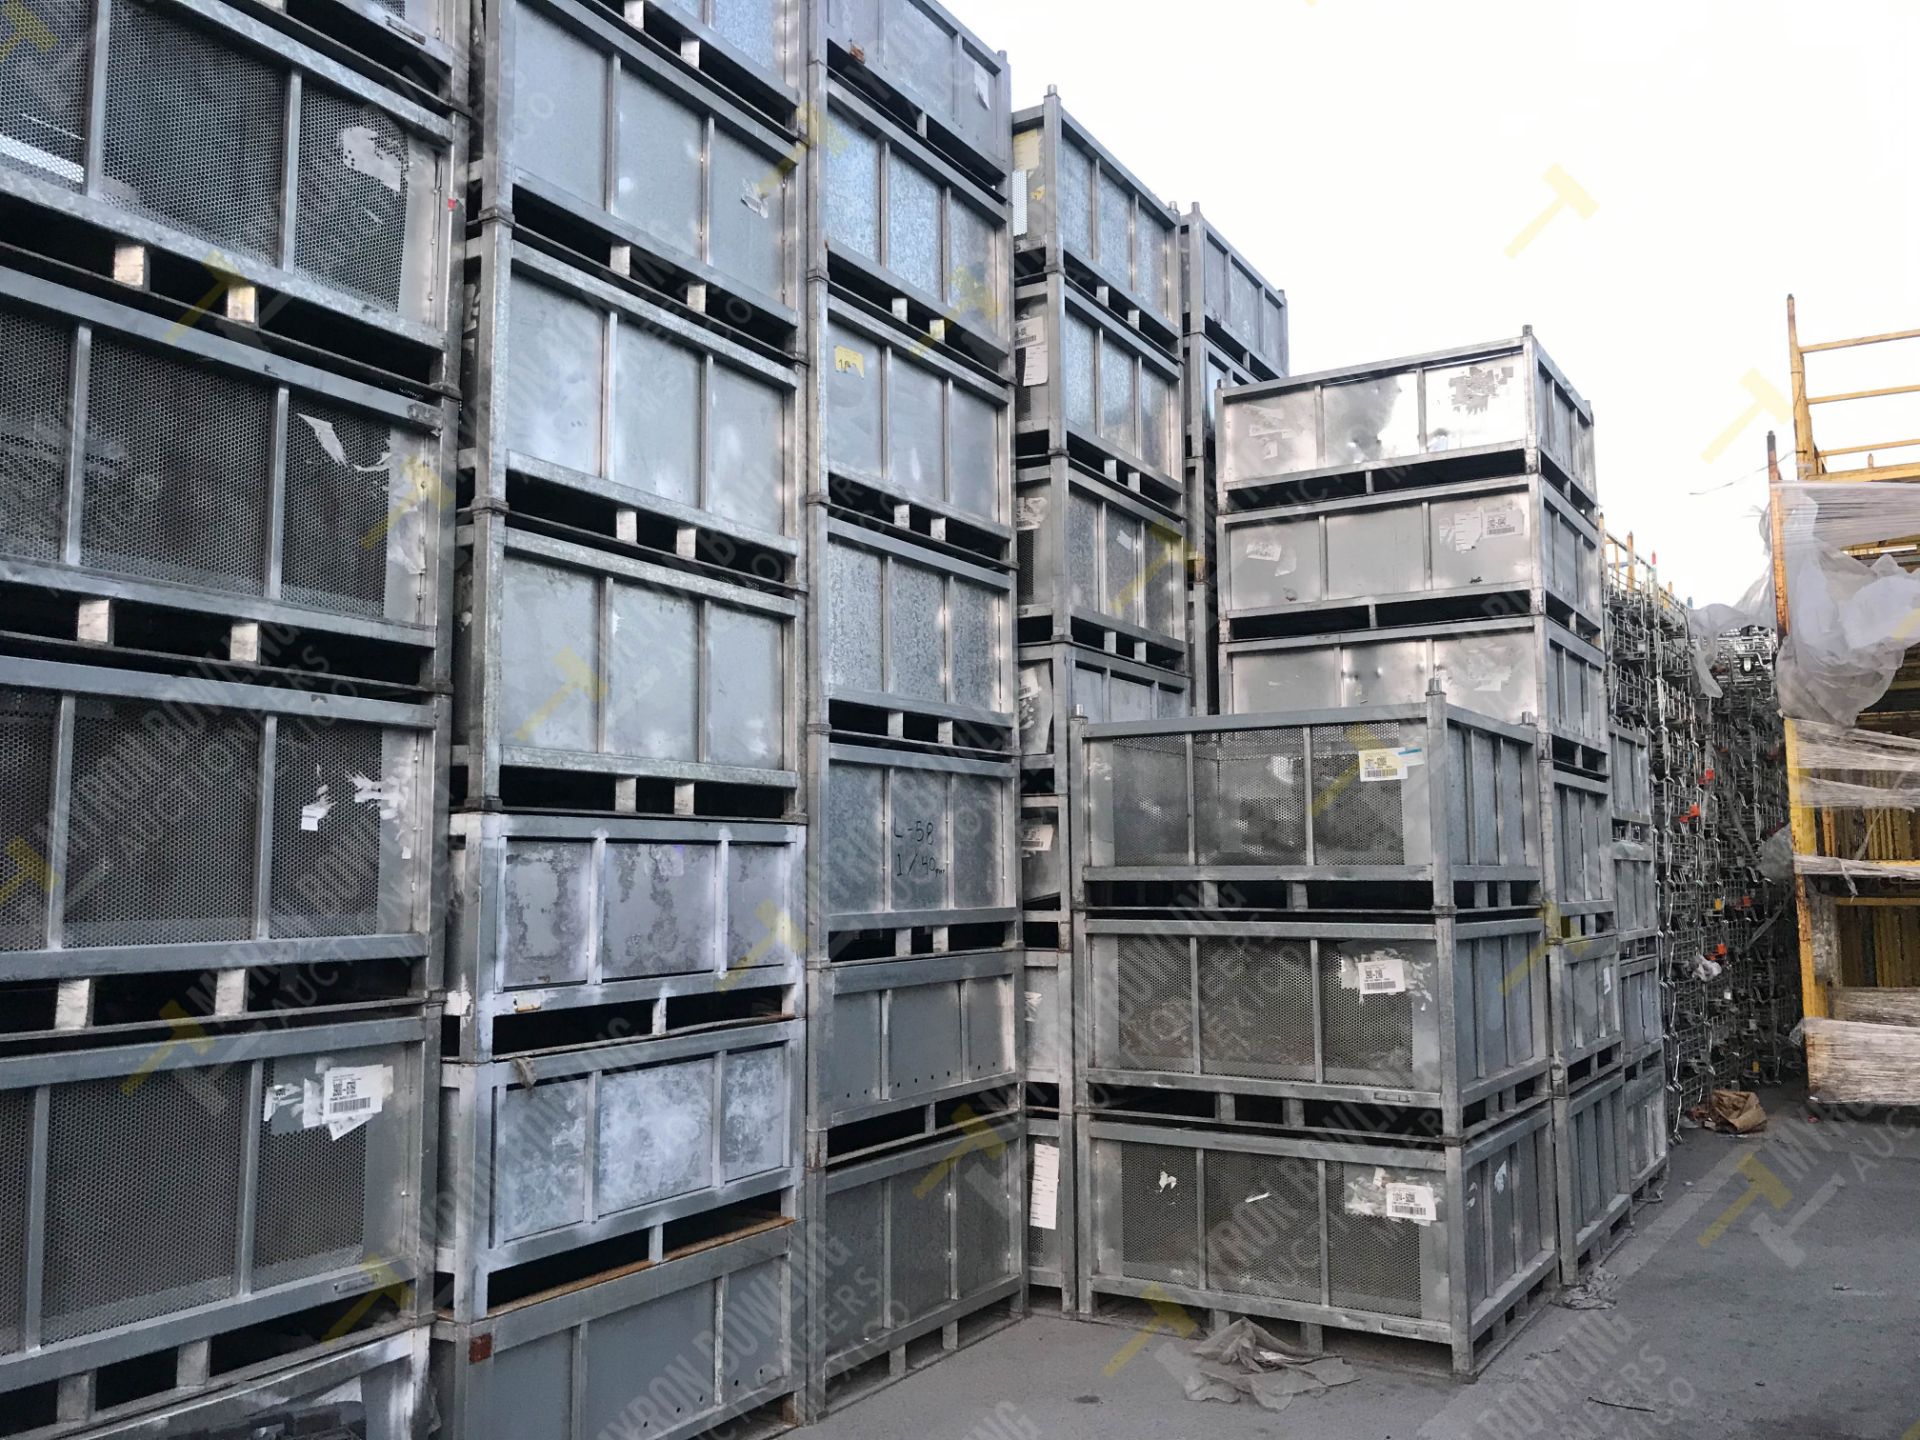 70 GALVANIZED STEEL CONTAINERS XYTEC (DIMENSIONS 0.60x1.32x1.24 METERS) - Image 5 of 8